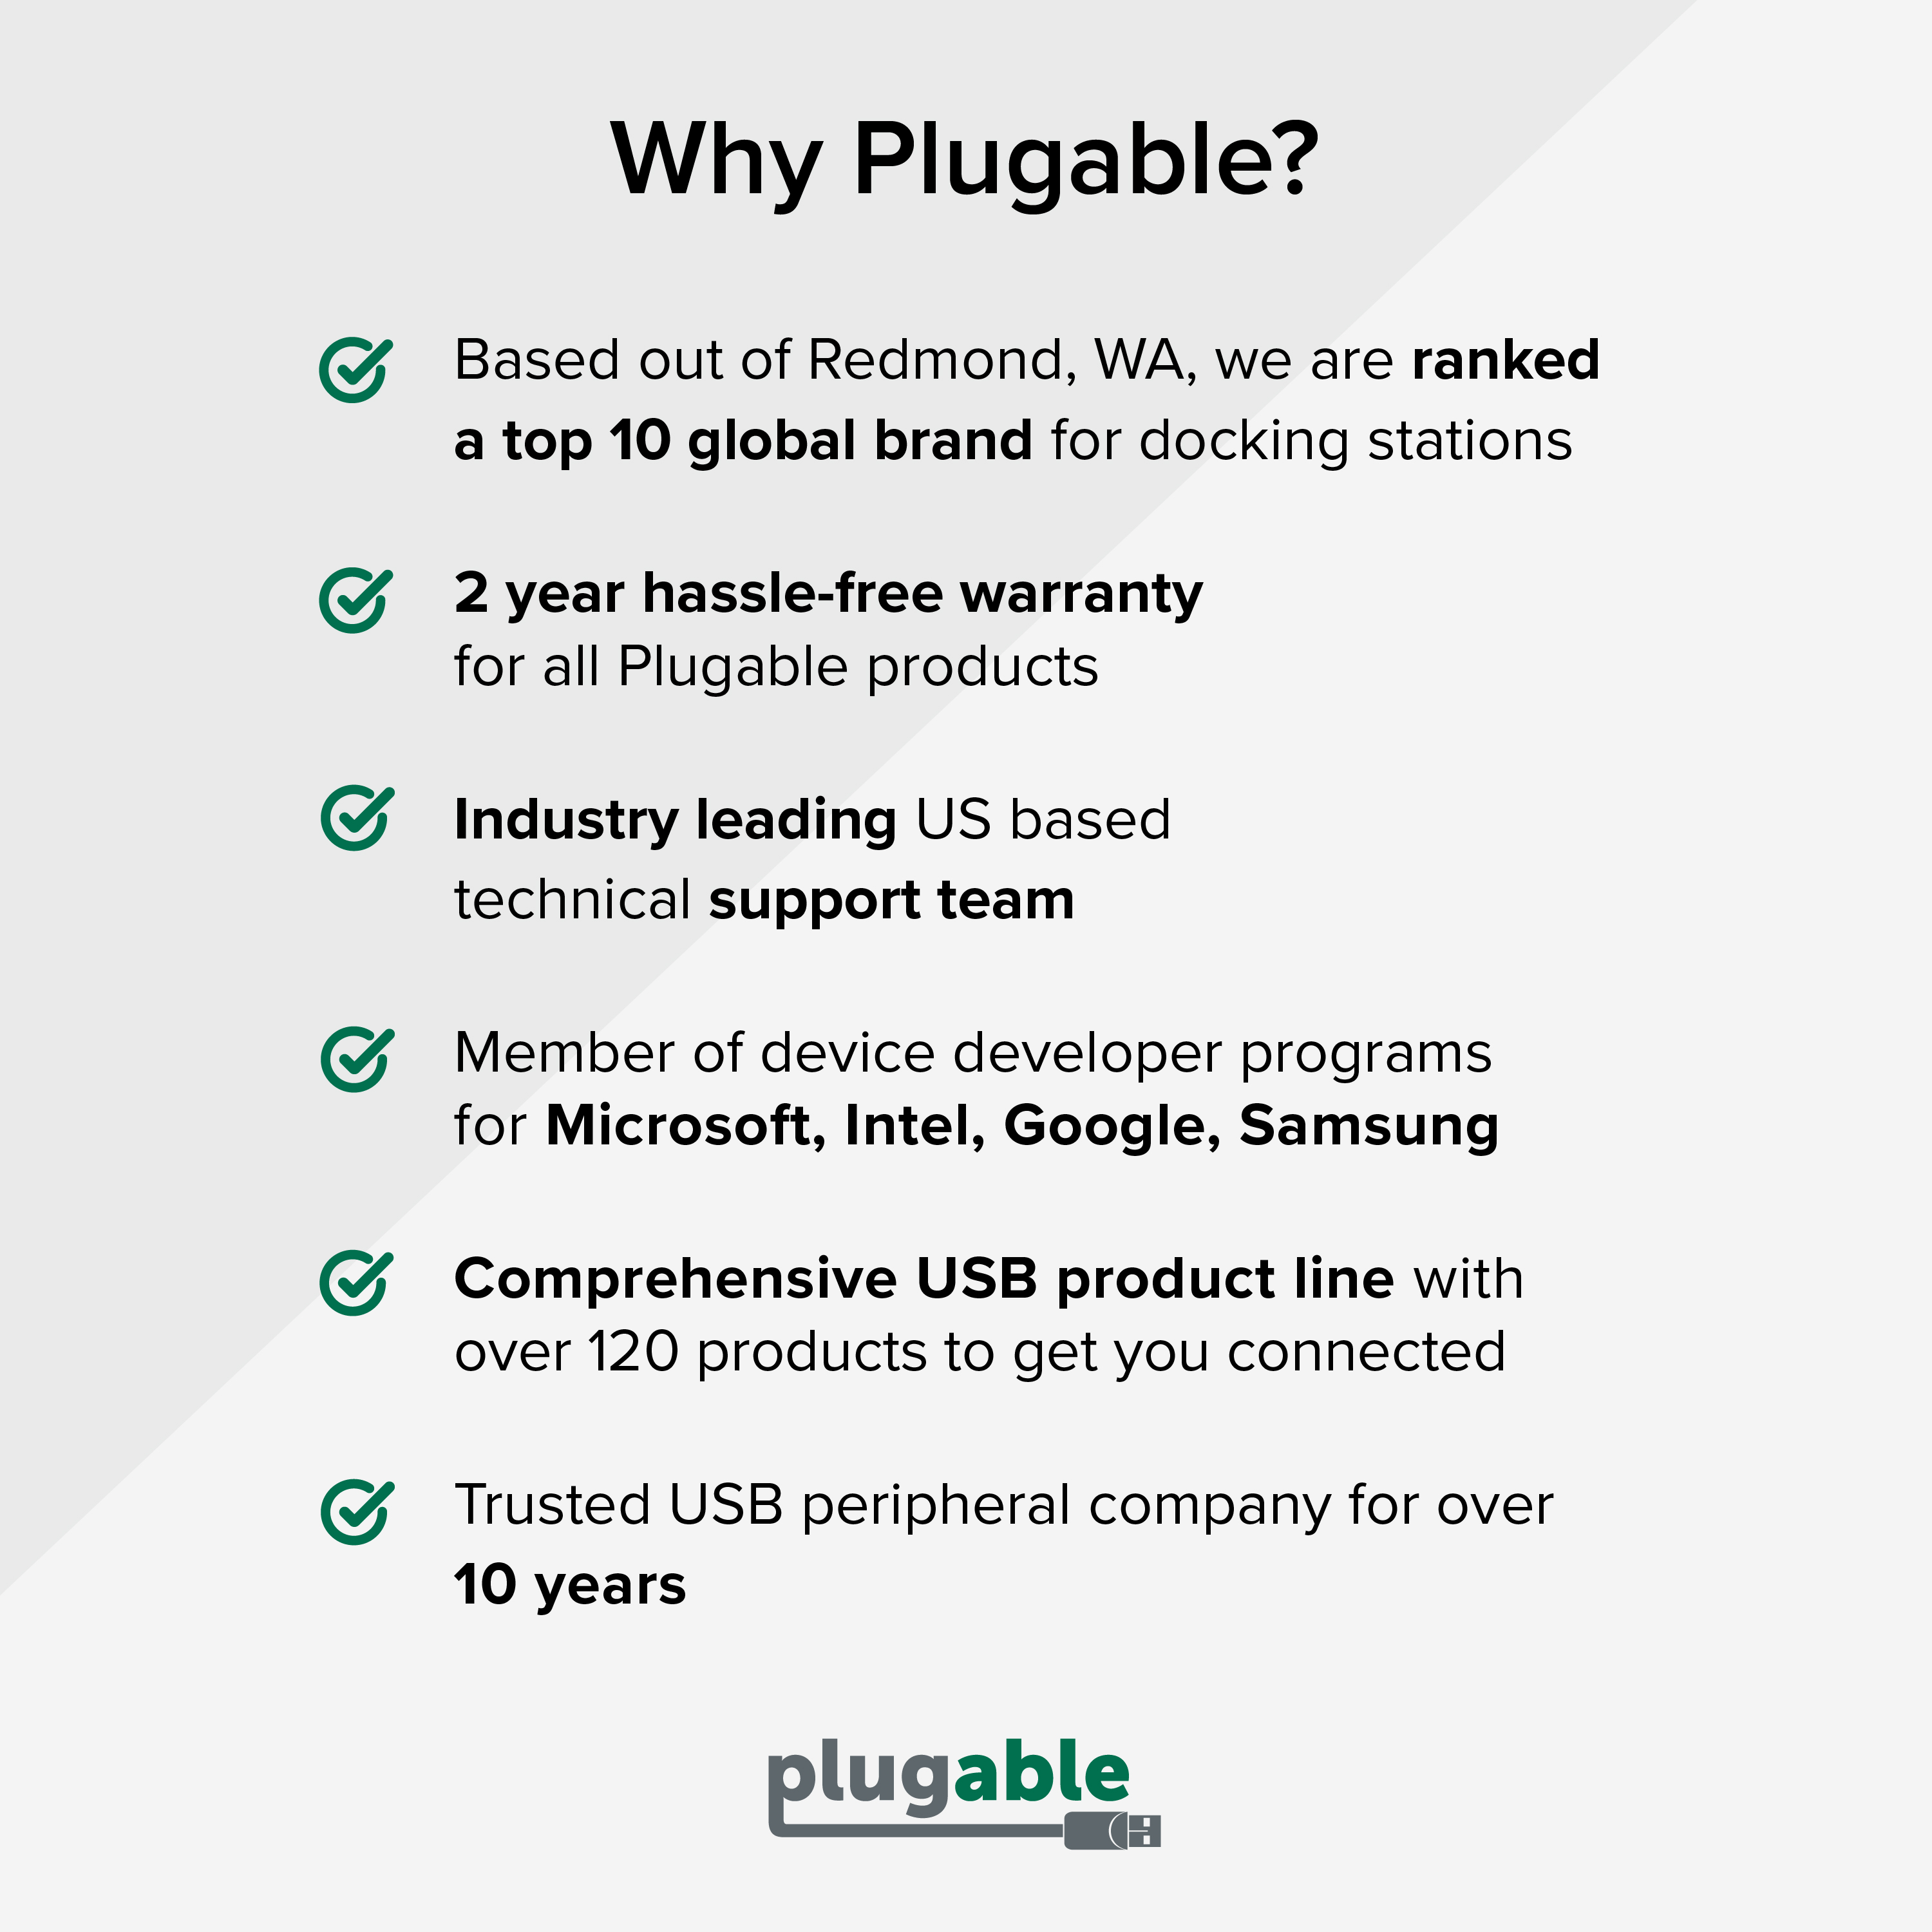 Plugable USB Universal Fast 1A Charge-Only Adapter for Android, Apple iOS, and Windows Mobile Devices - image 5 of 5